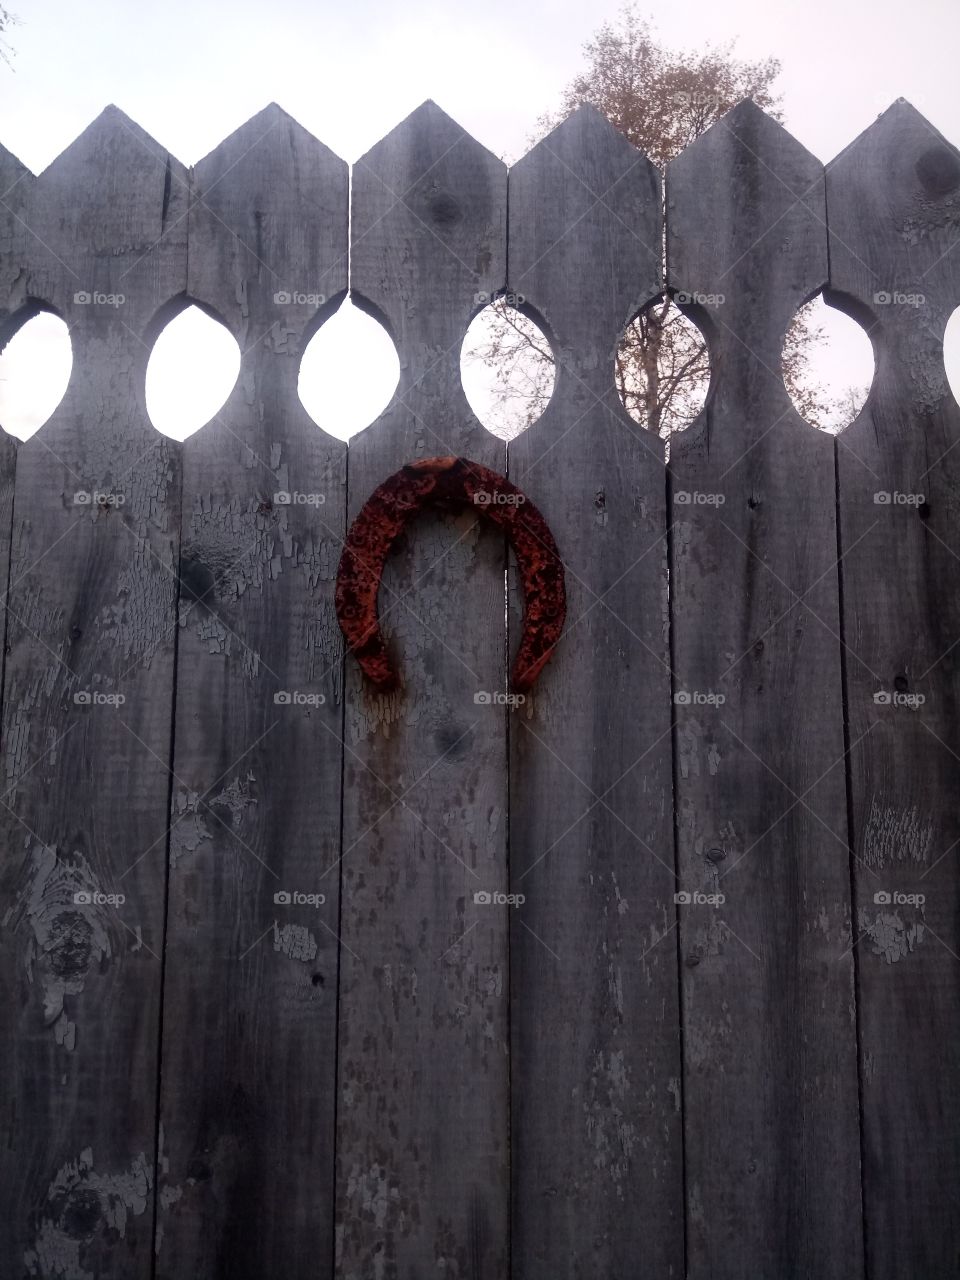 Old wooden fence with a rusty horseshoe